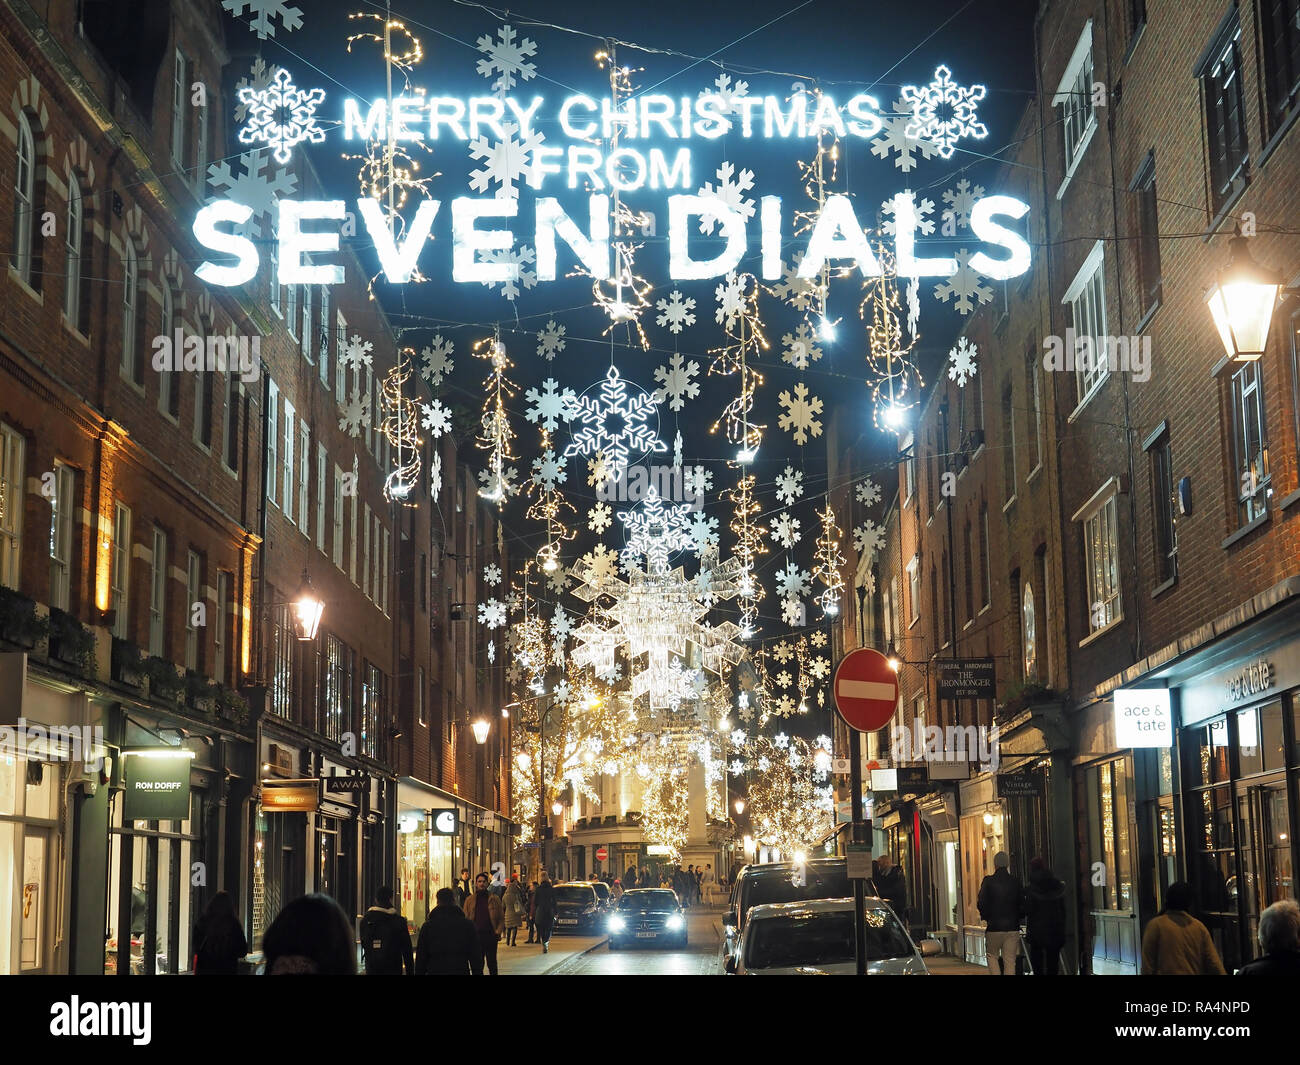 View of the London Seven Dials Christmas street decorations at night Stock Photo